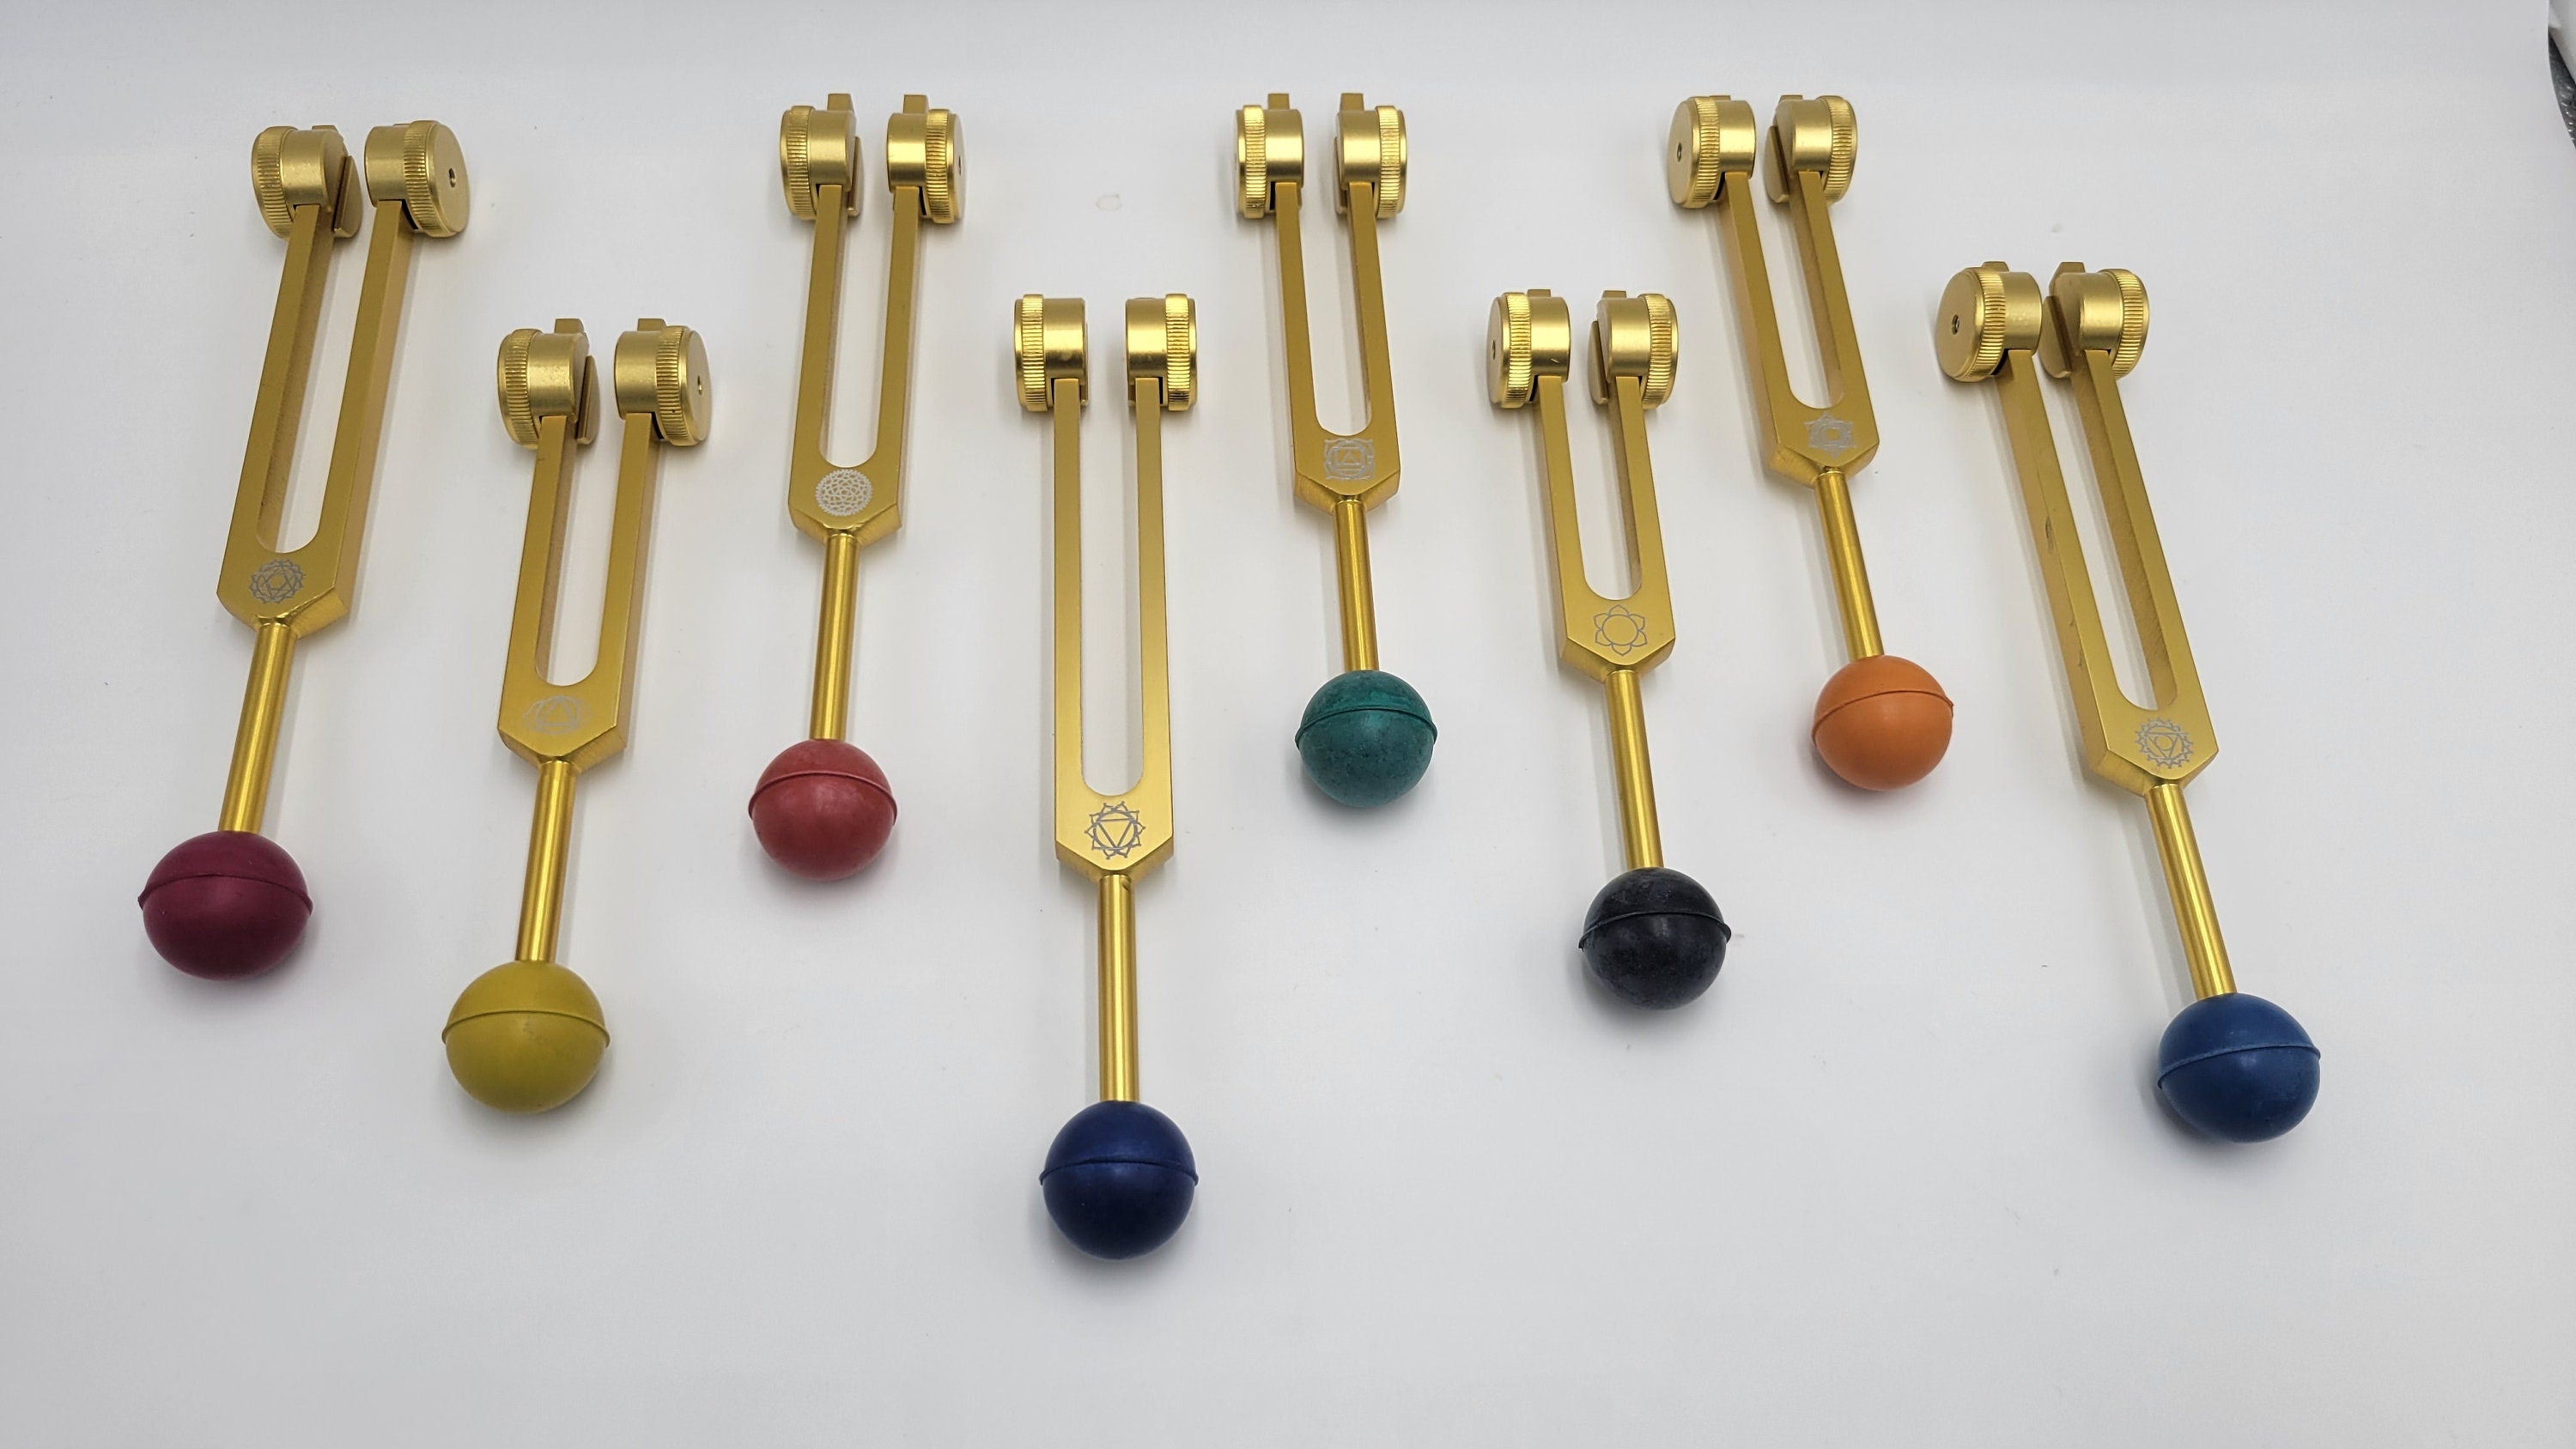 Professional Gold Weighted Chakra Tuning Forks with Removable Rubber Balls Individual Chakra Pouch 8 Mallets - Please Check ALL PICTURES - soundhealers